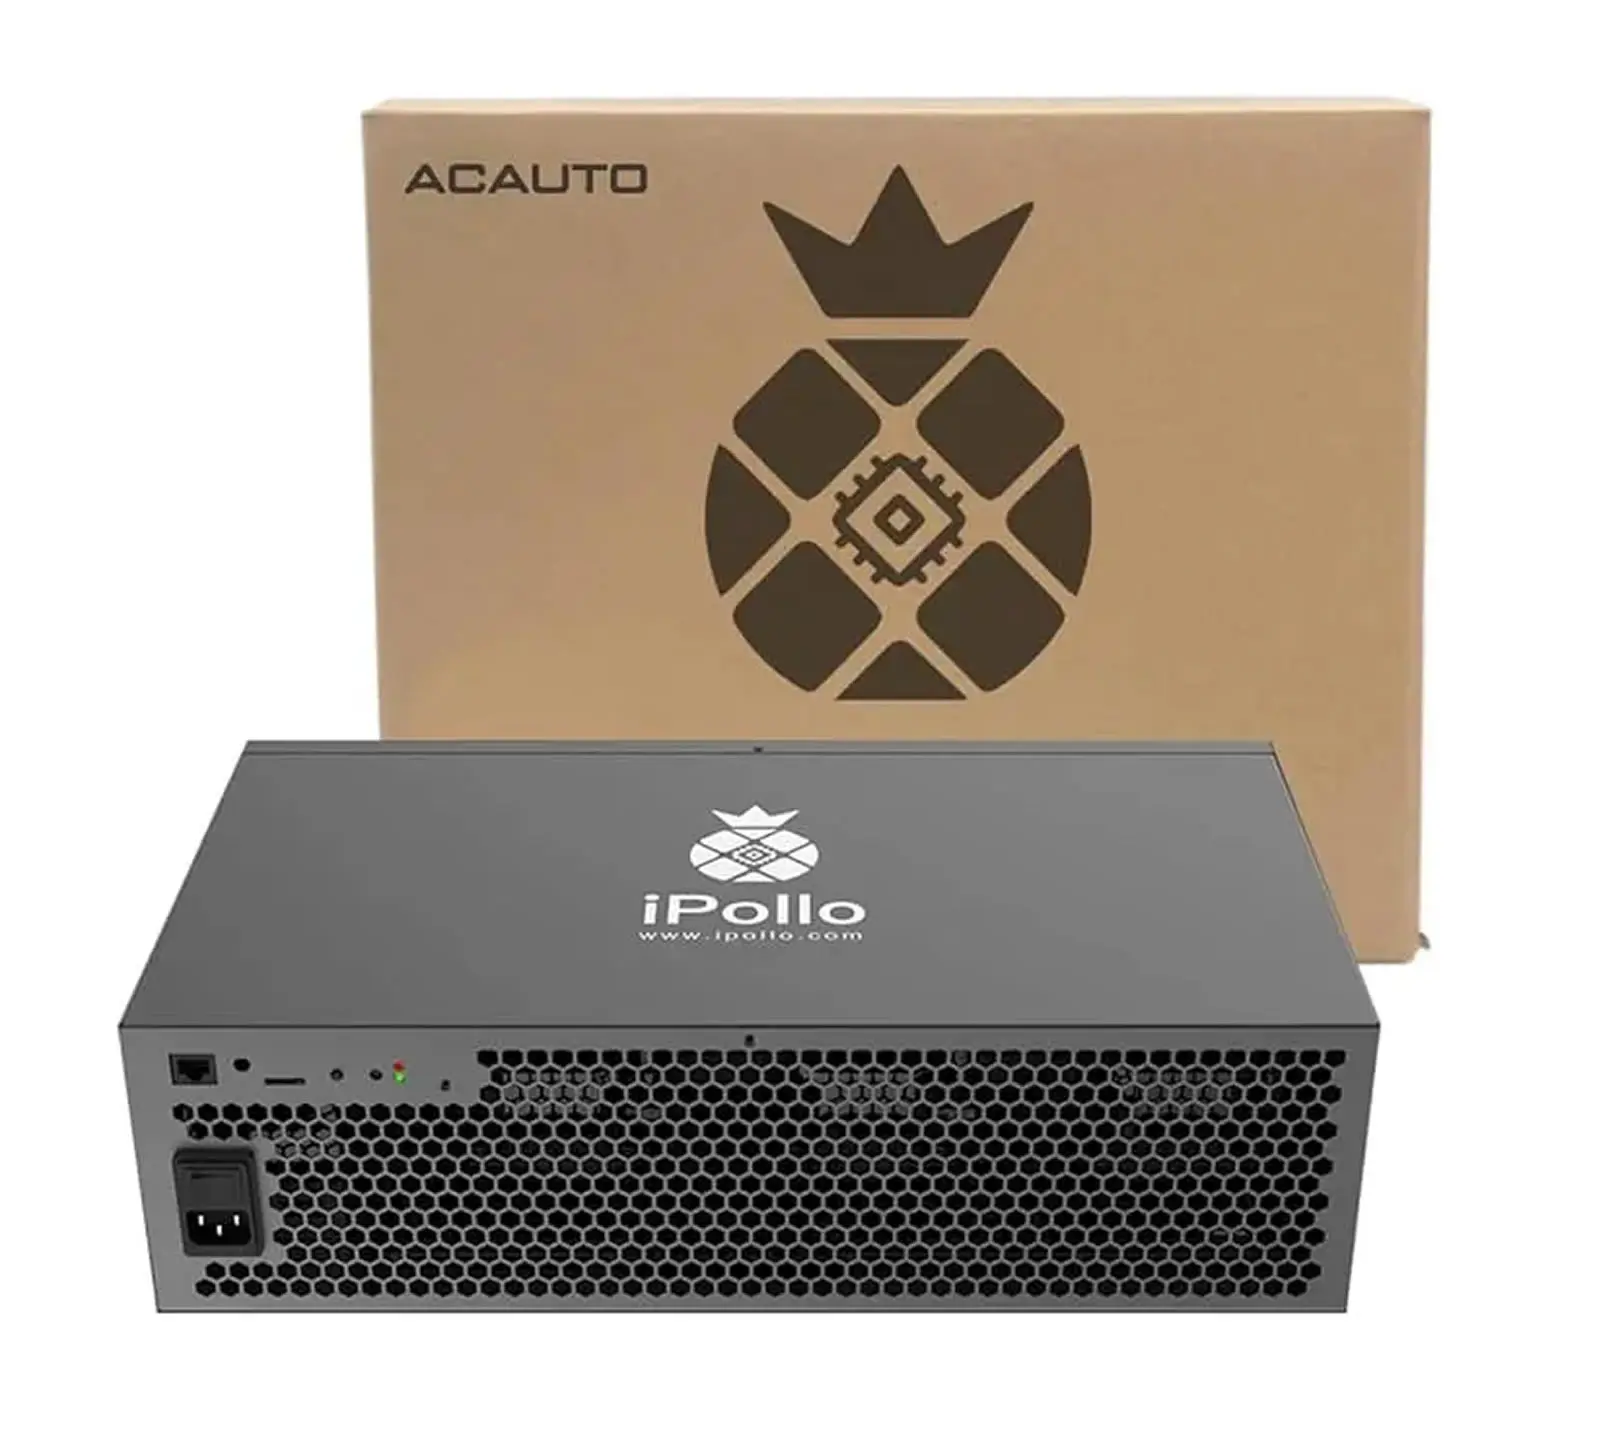 Buy 2 Get 1 Free iPollo V1H Hydro Miner 850MH/s 690W ETC Octa ASIC Miner..